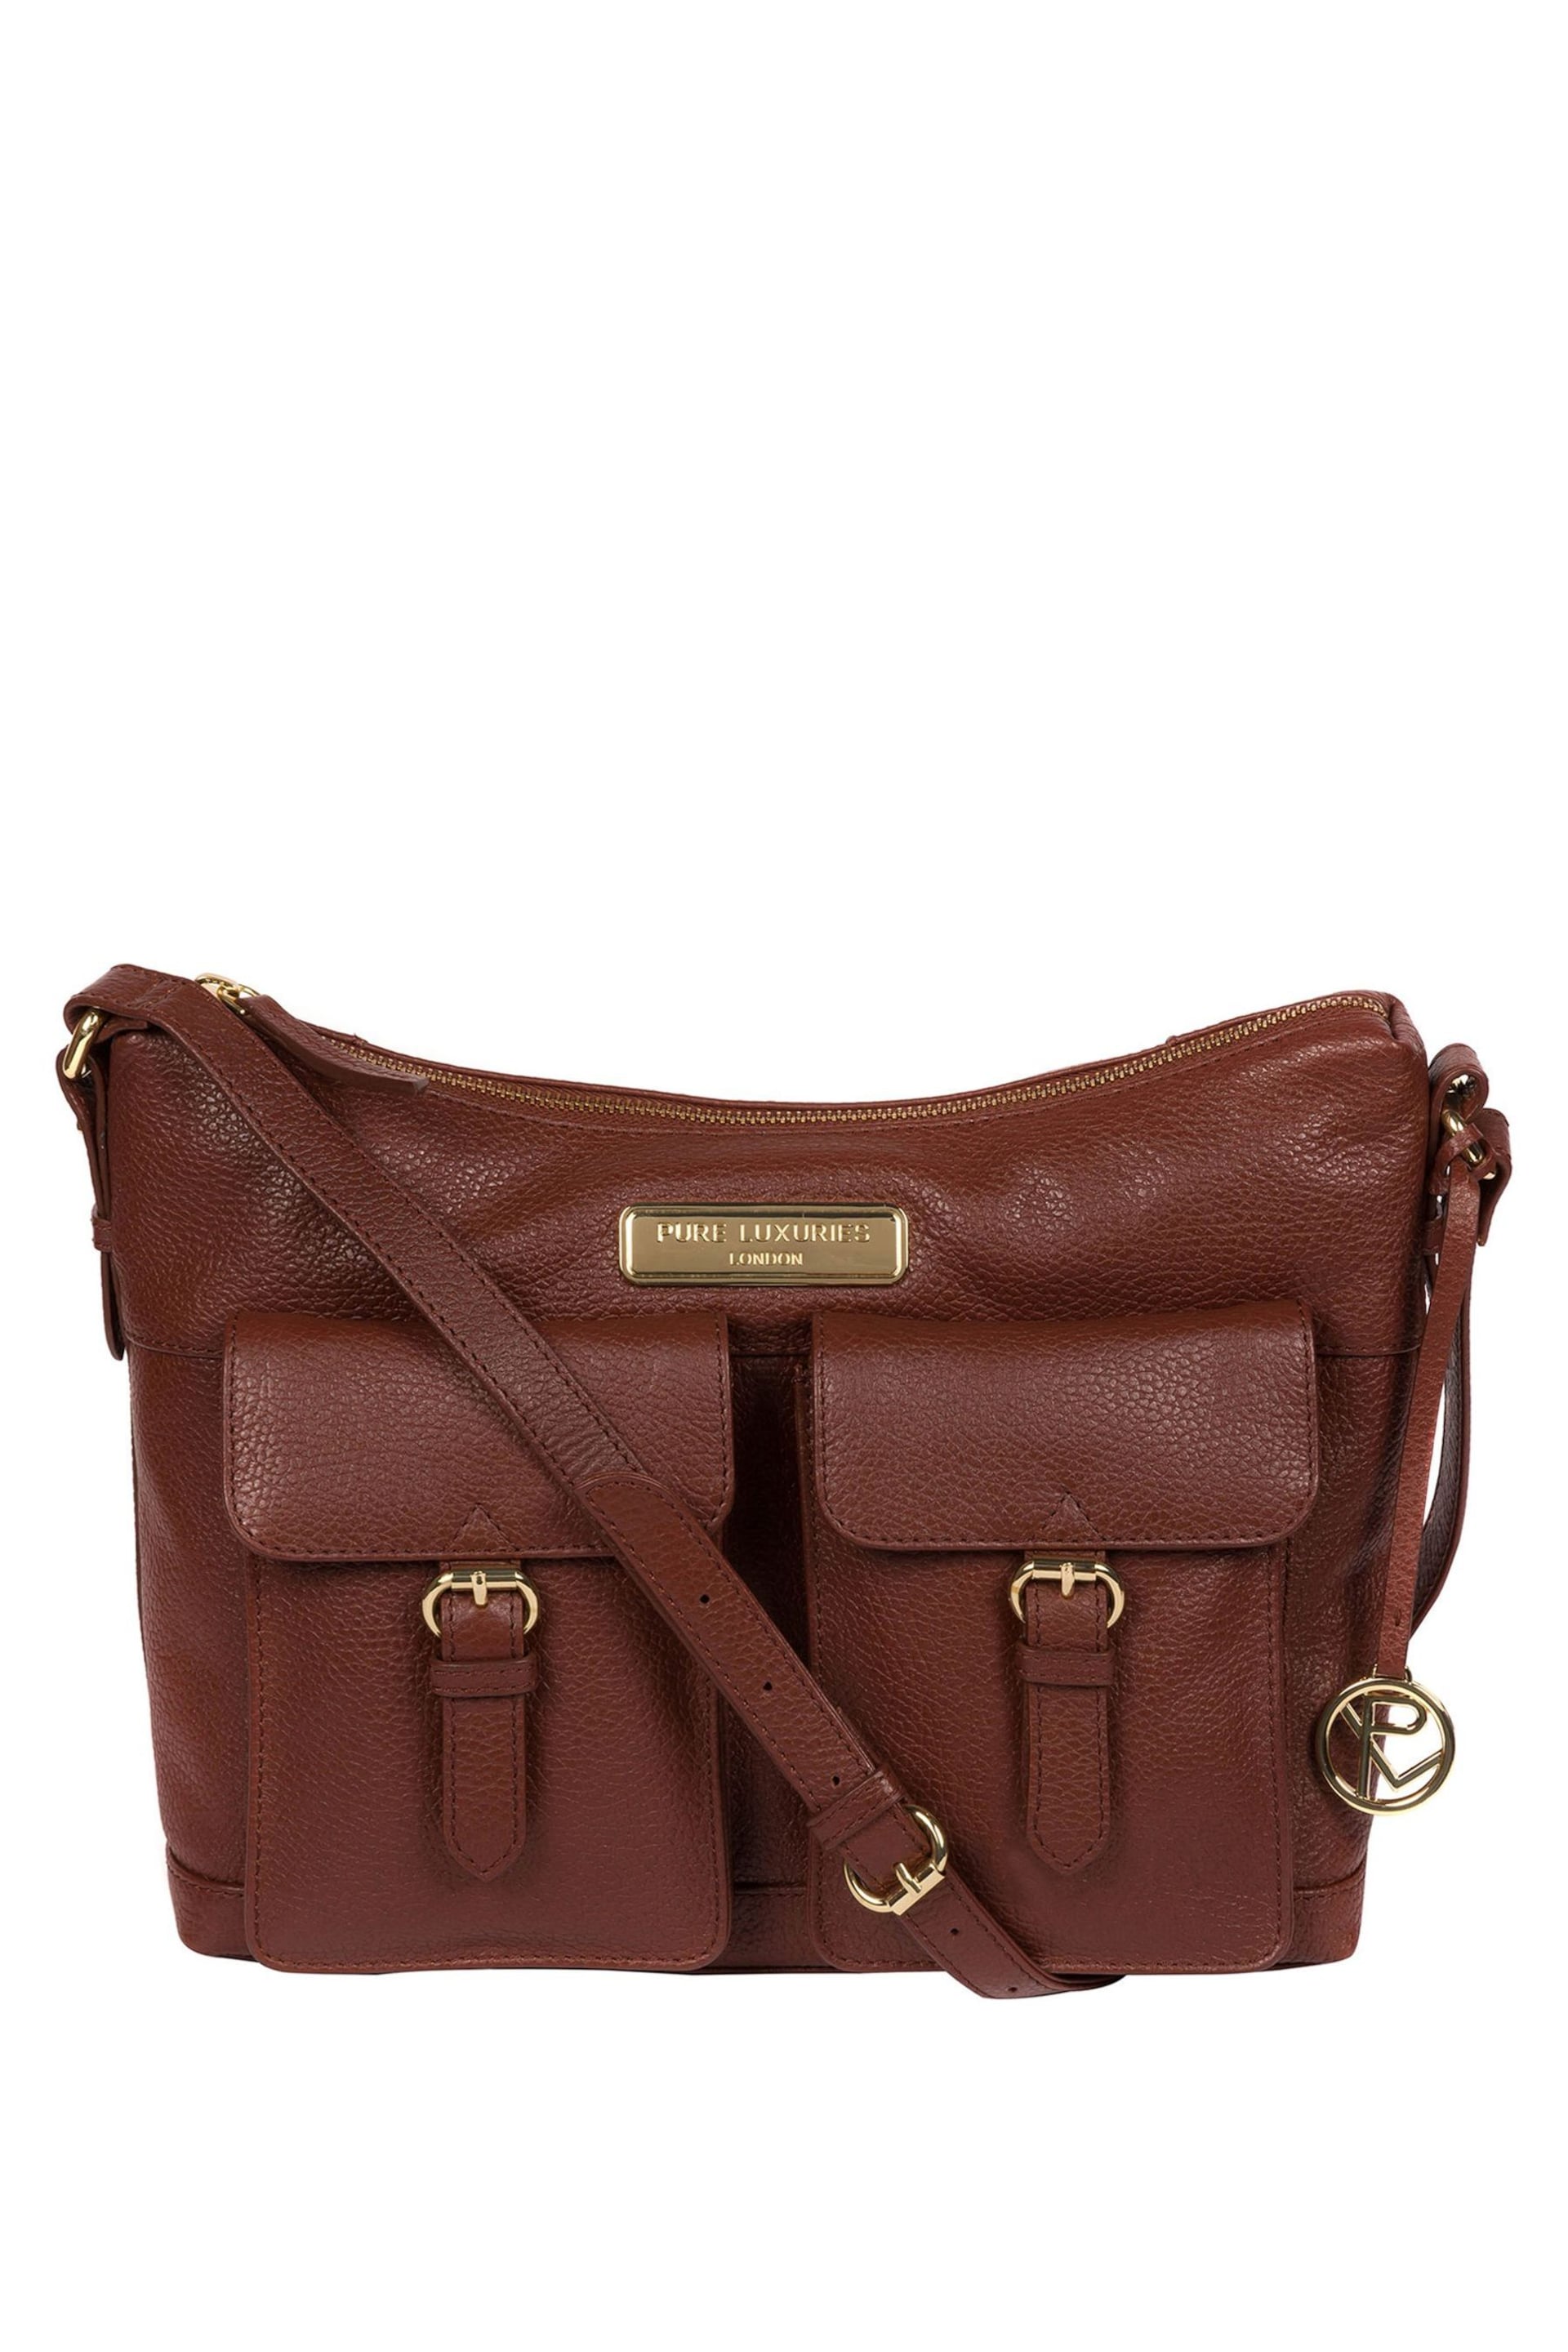 Pure Luxuries London Jenna Leather Shoulder Bag - Image 1 of 5